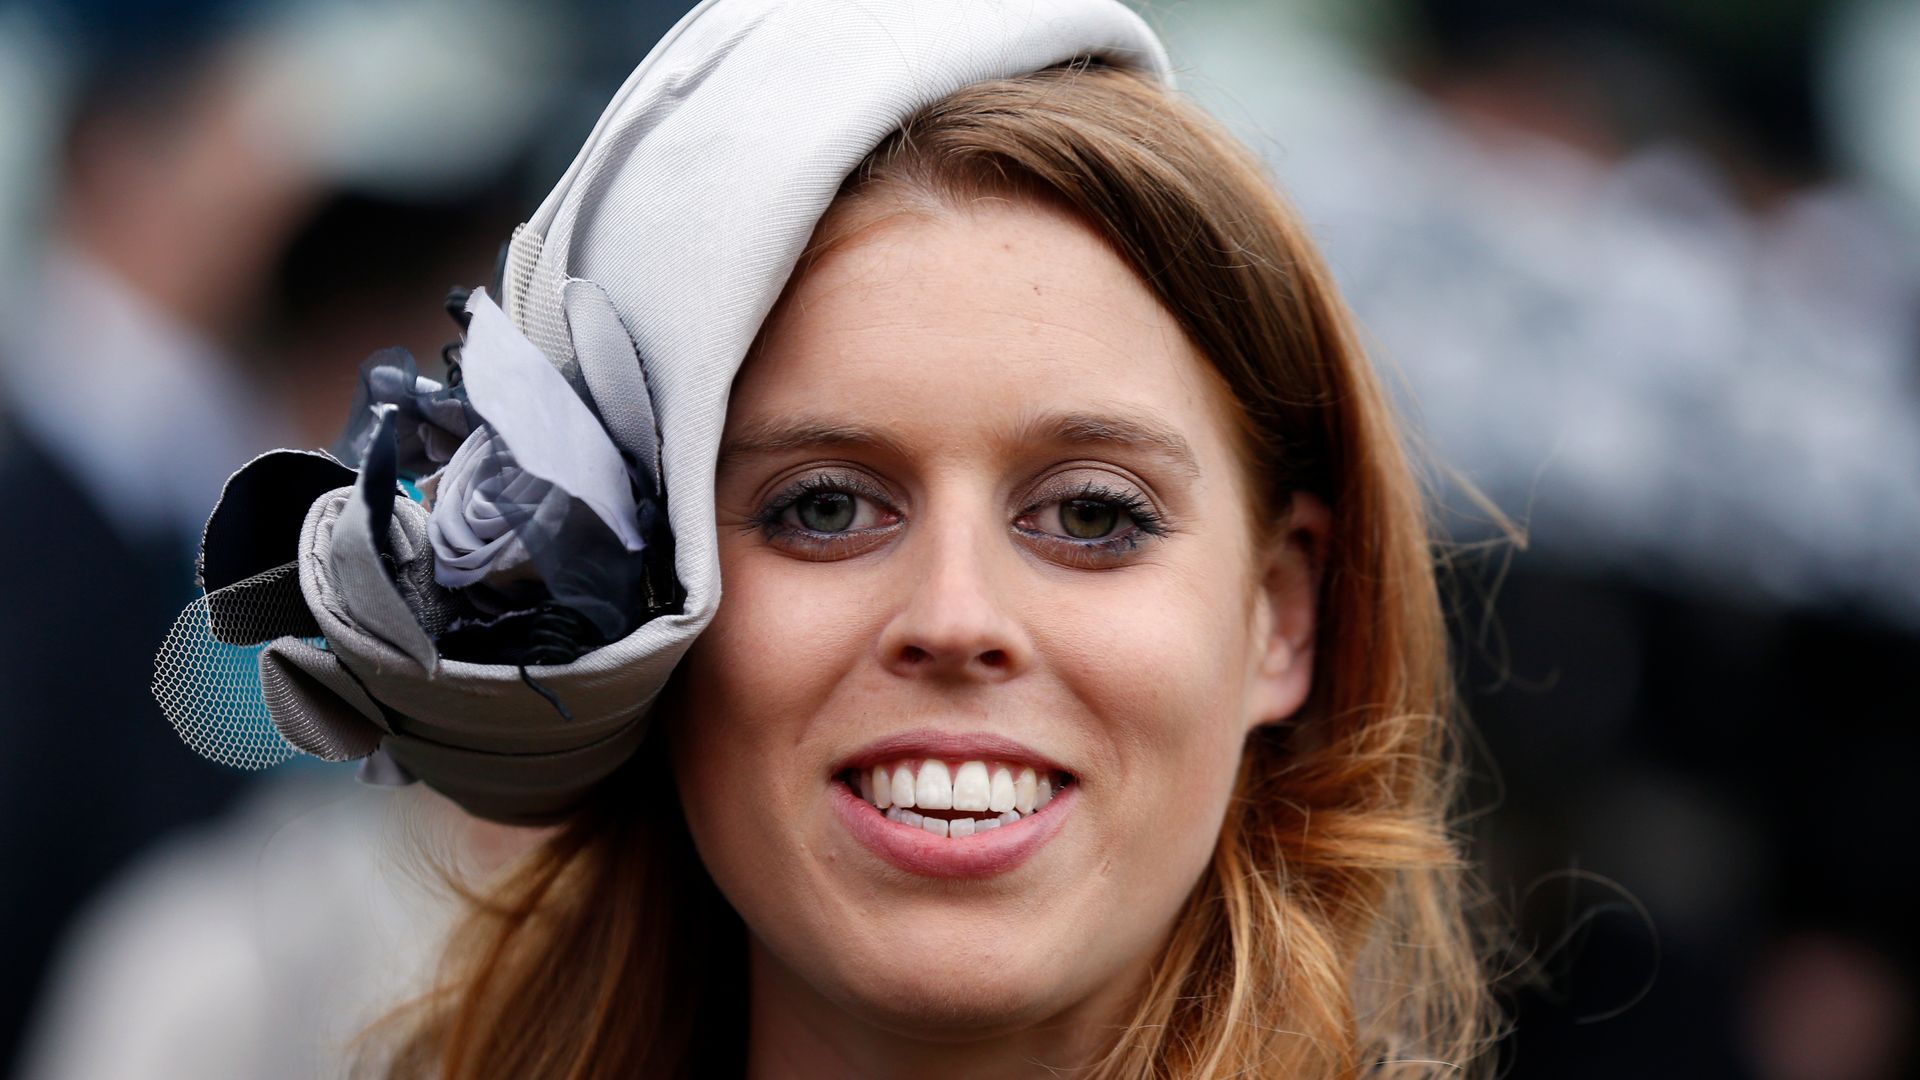 5 of Princess Beatrice's closest friends: Inside her inner circle